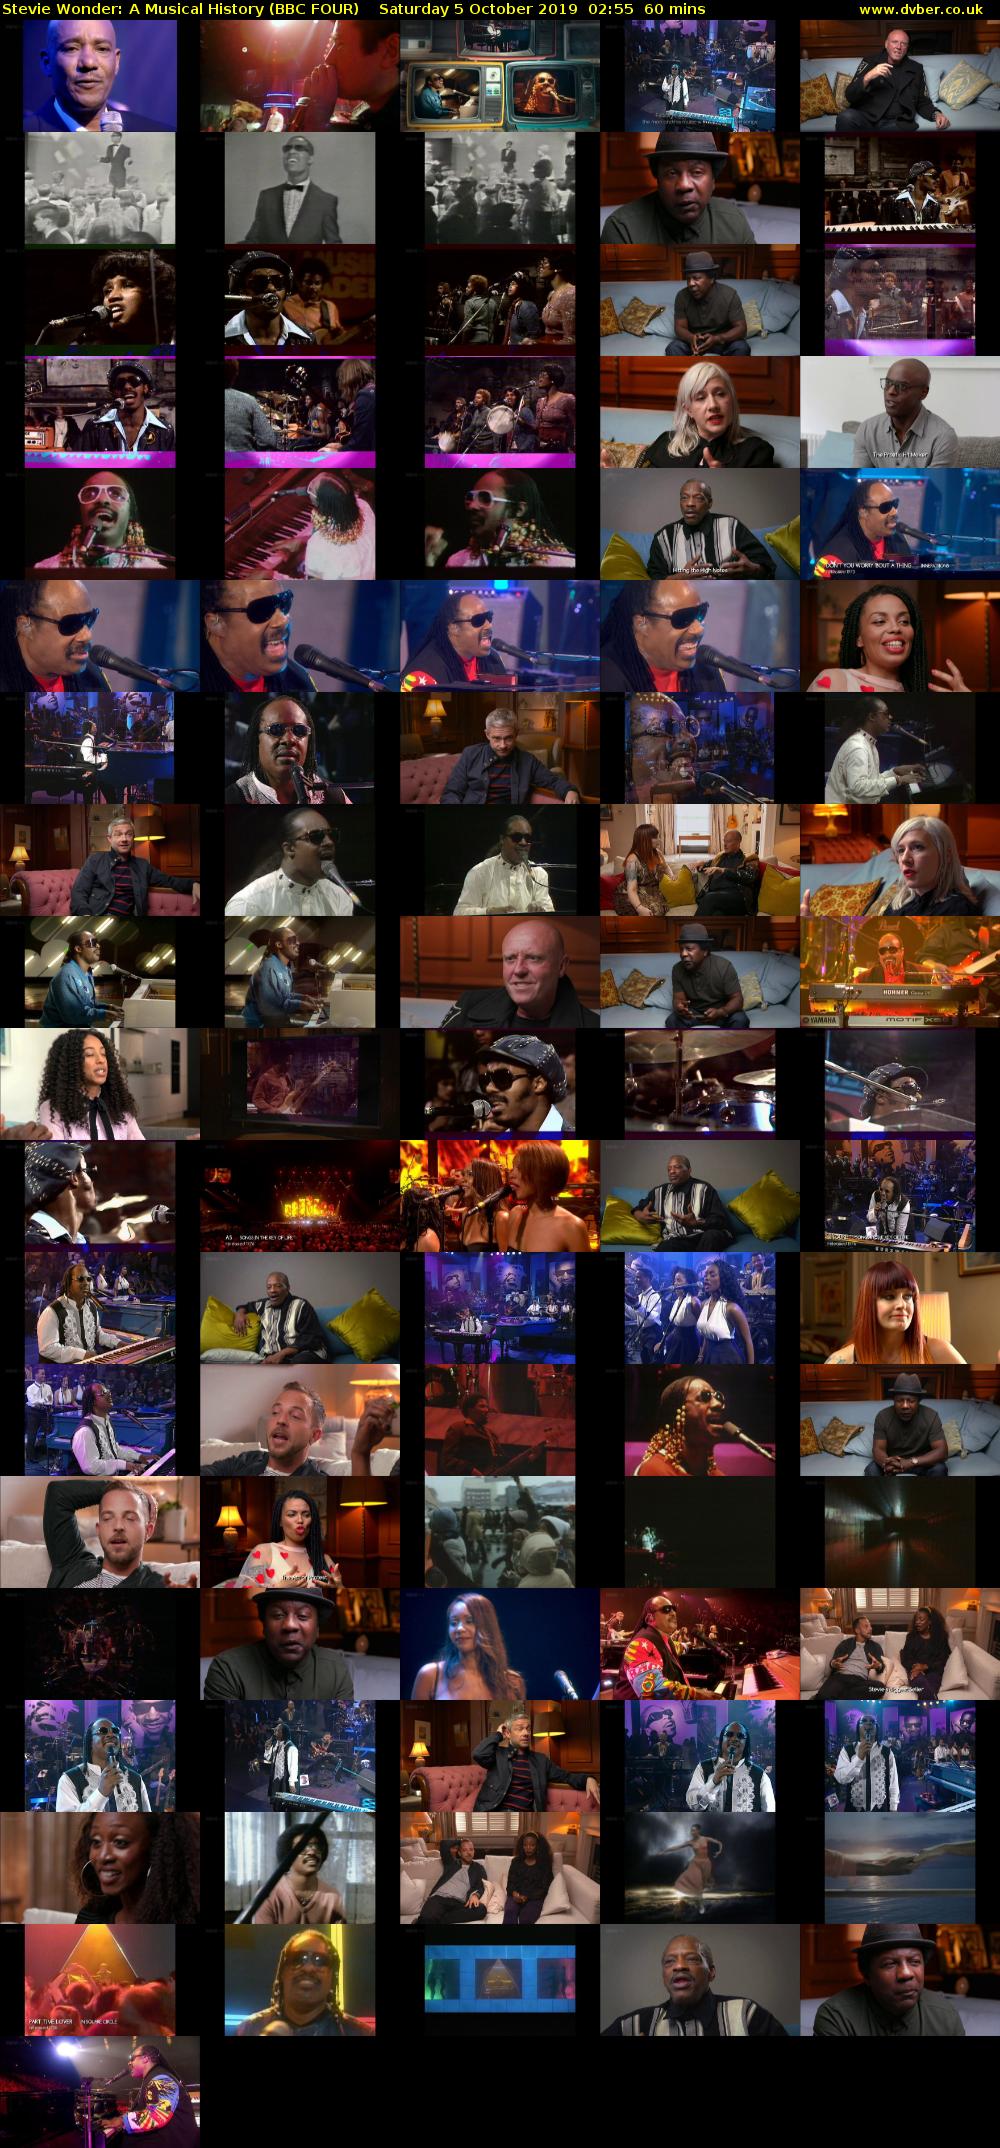 Stevie Wonder: A Musical History (BBC FOUR) Saturday 5 October 2019 02:55 - 03:55